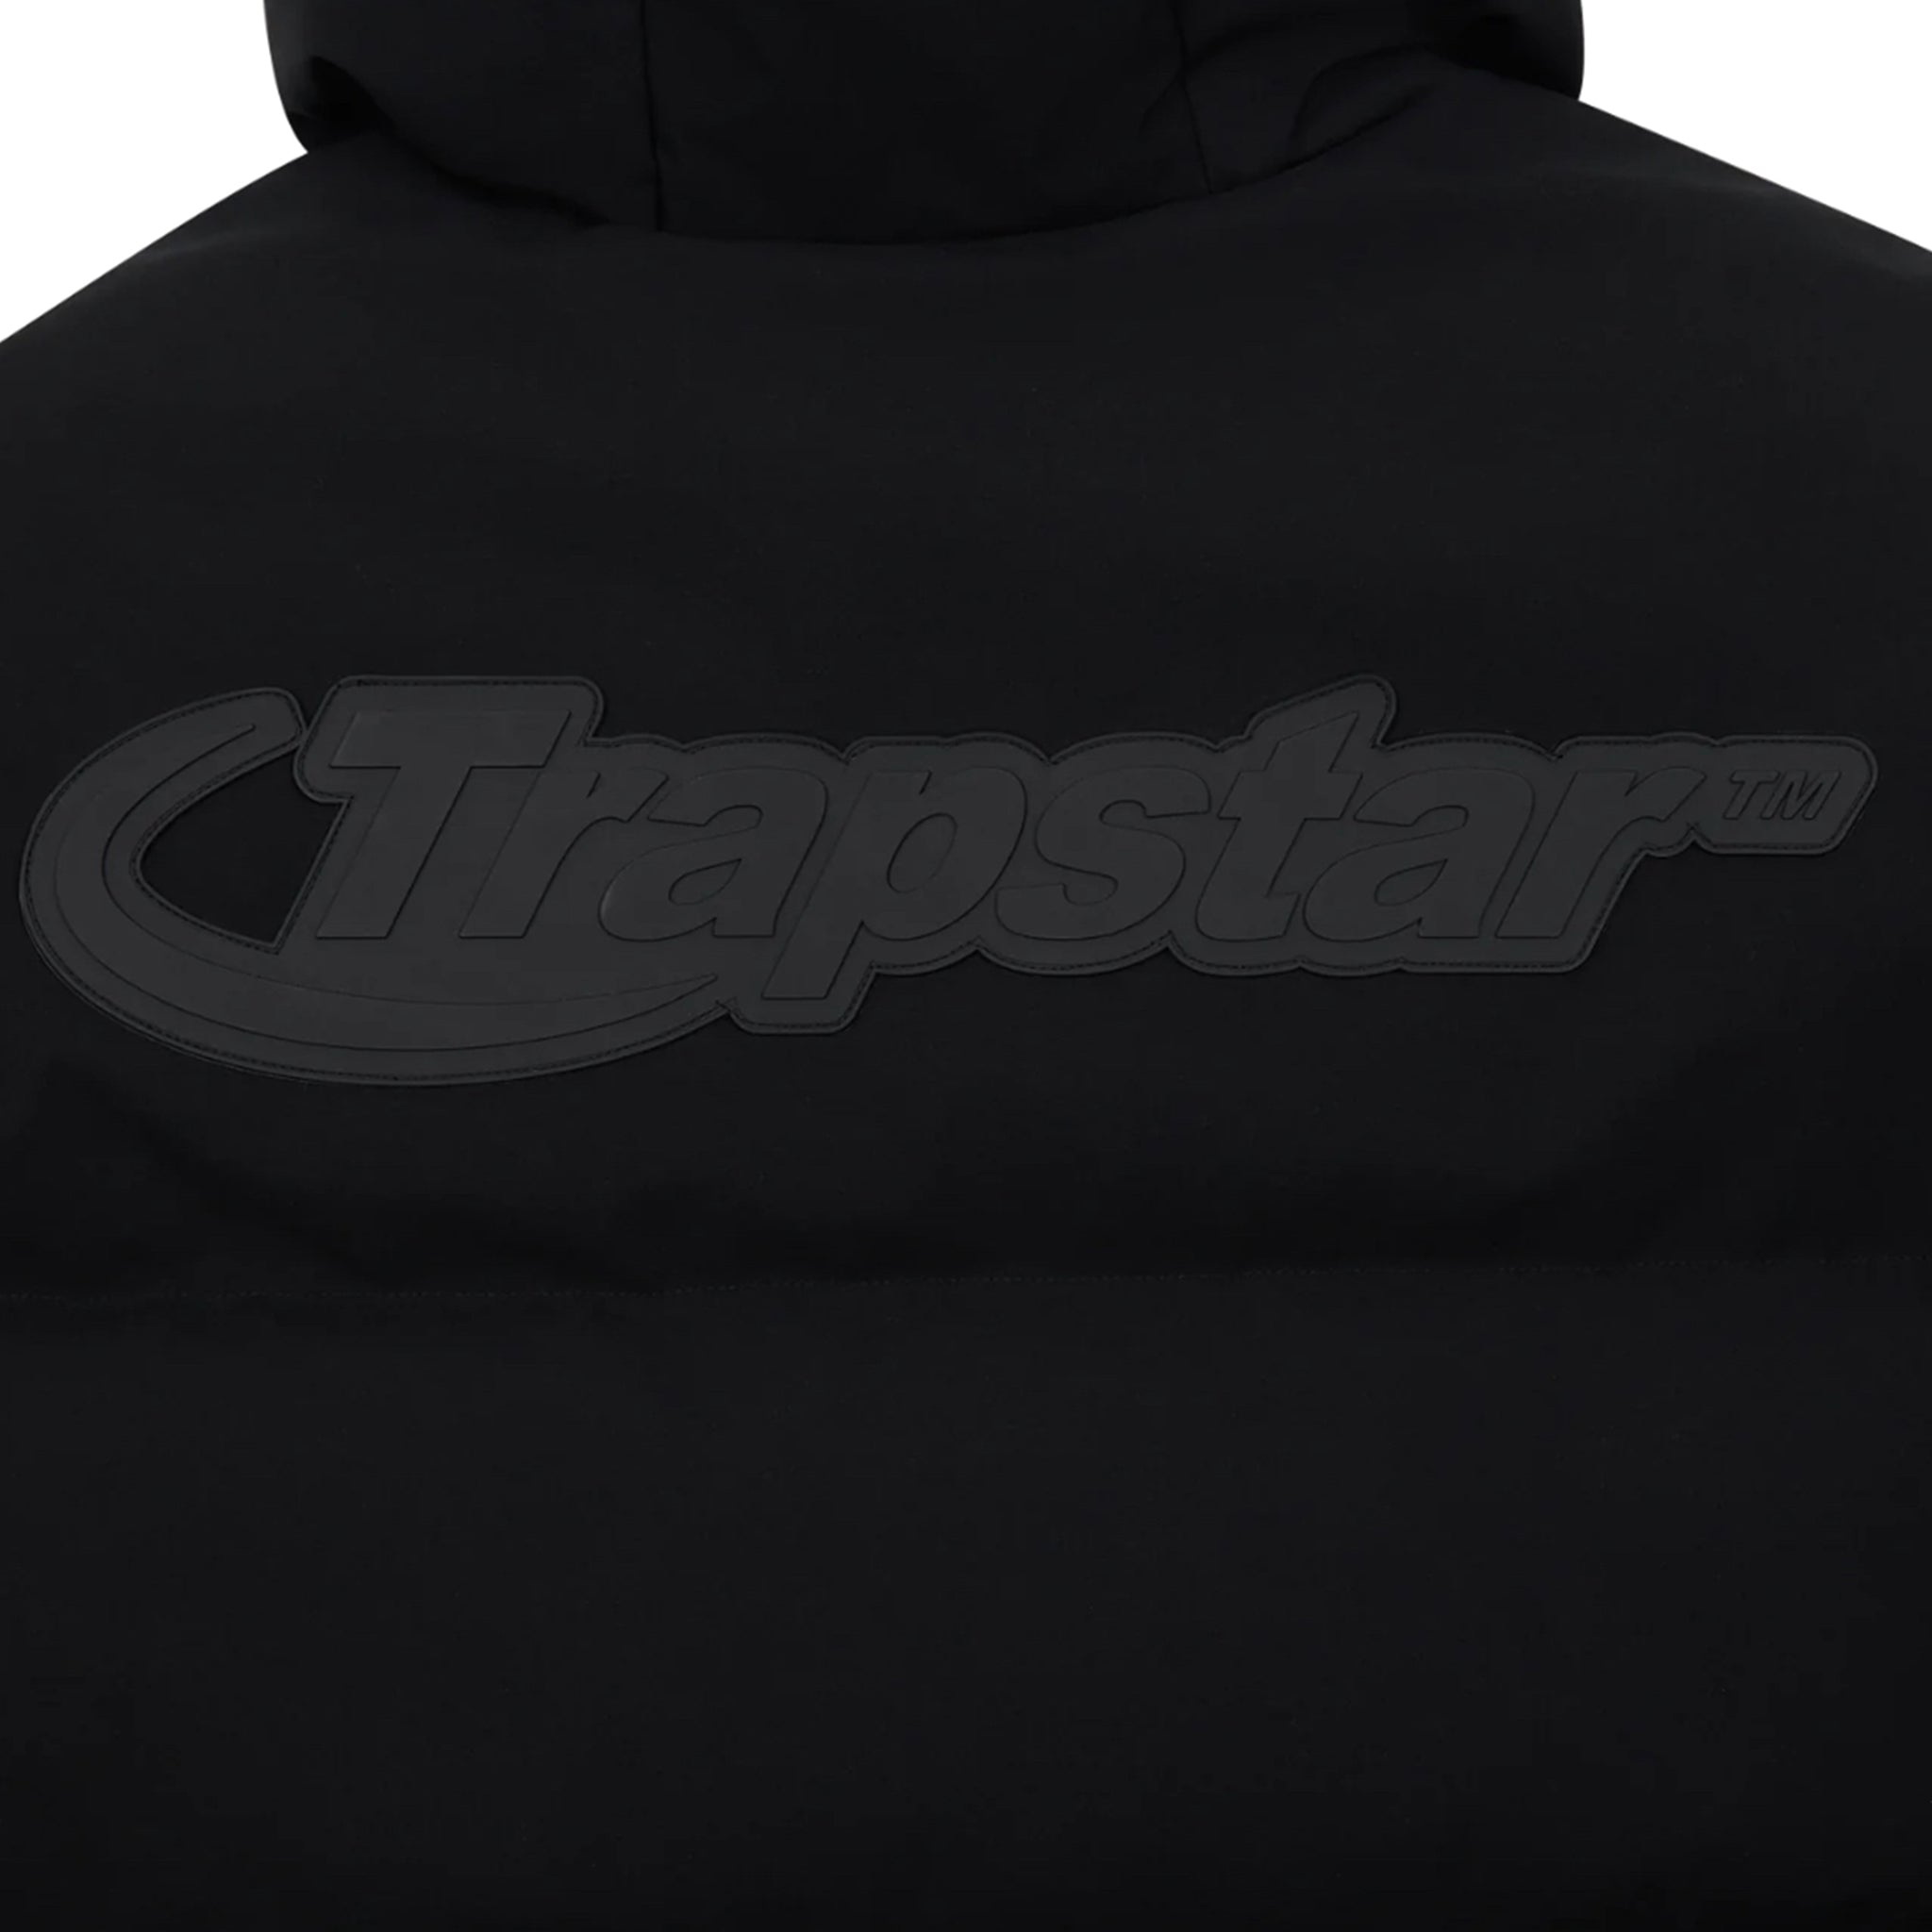 Back detail view of Trapstar Hyperdrive Technical Hooded Blackout Edition Puffer Jacket